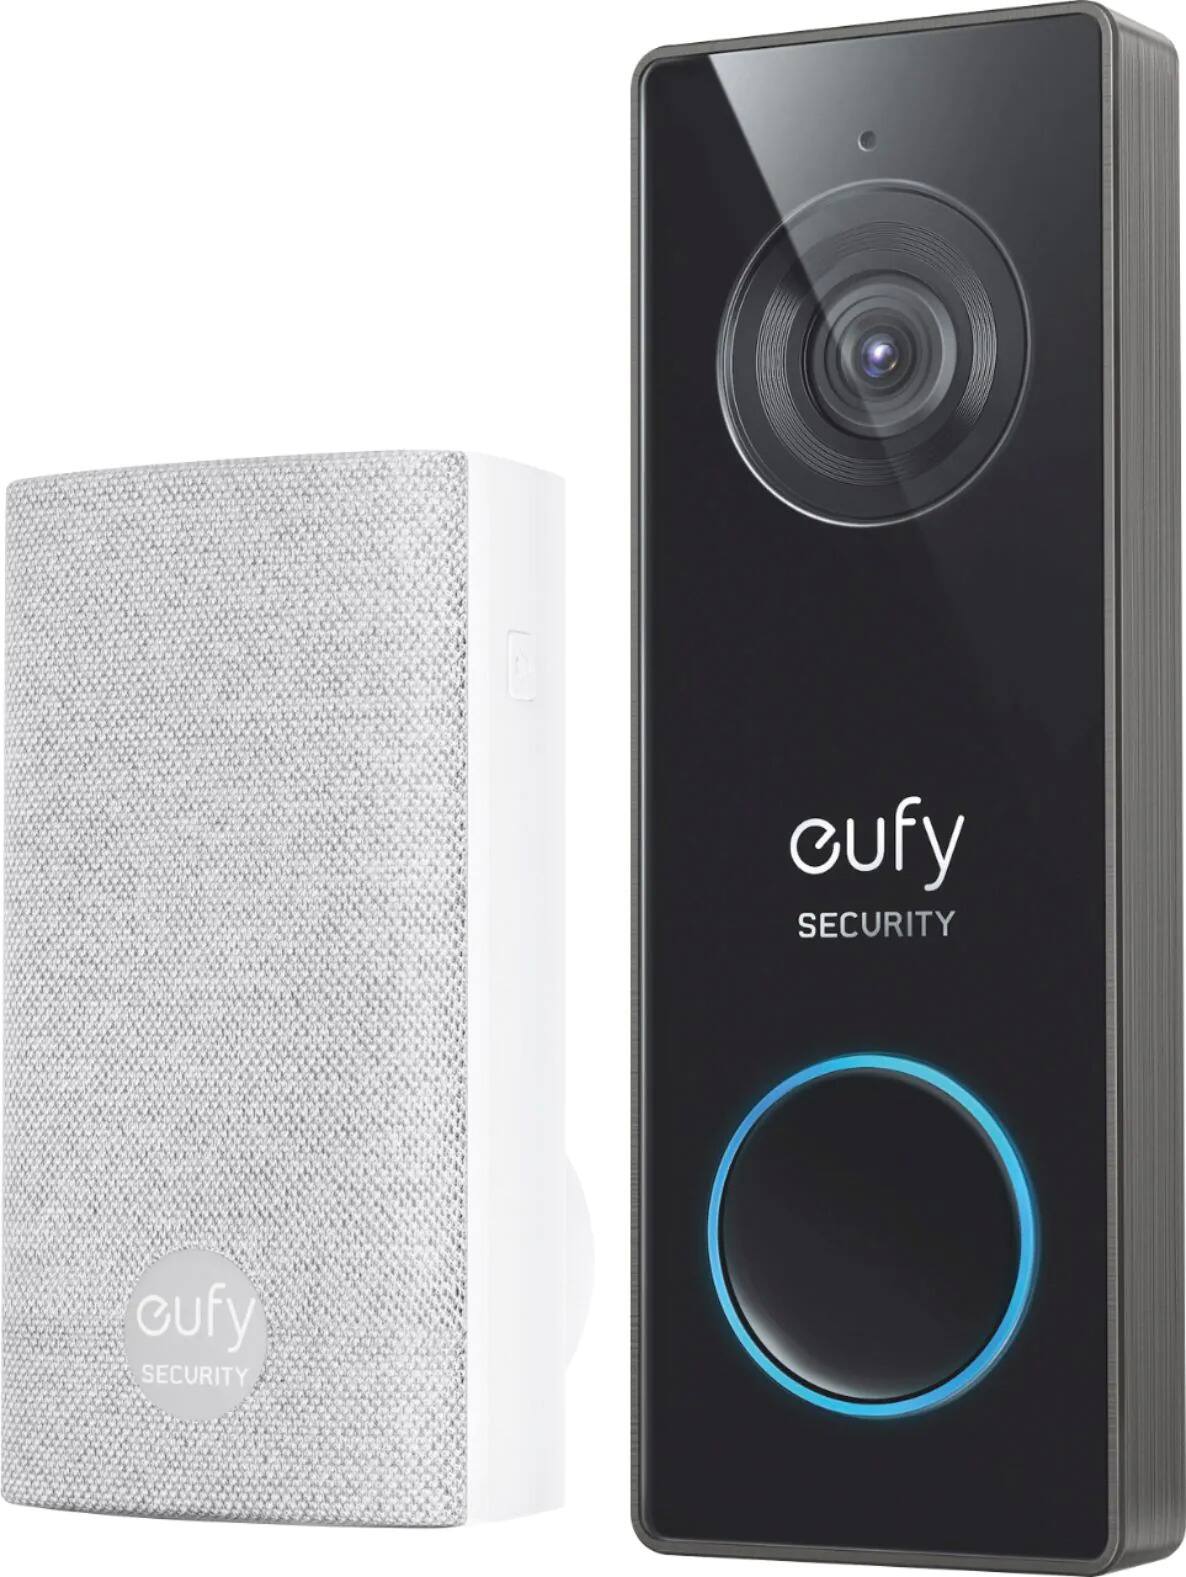 eufy Security Wired Video Doorbell 2C, 5-Day Continuous Video Recording, No Monthly Fees, Local Storage, Free Chime $119.99 + Free Shipping